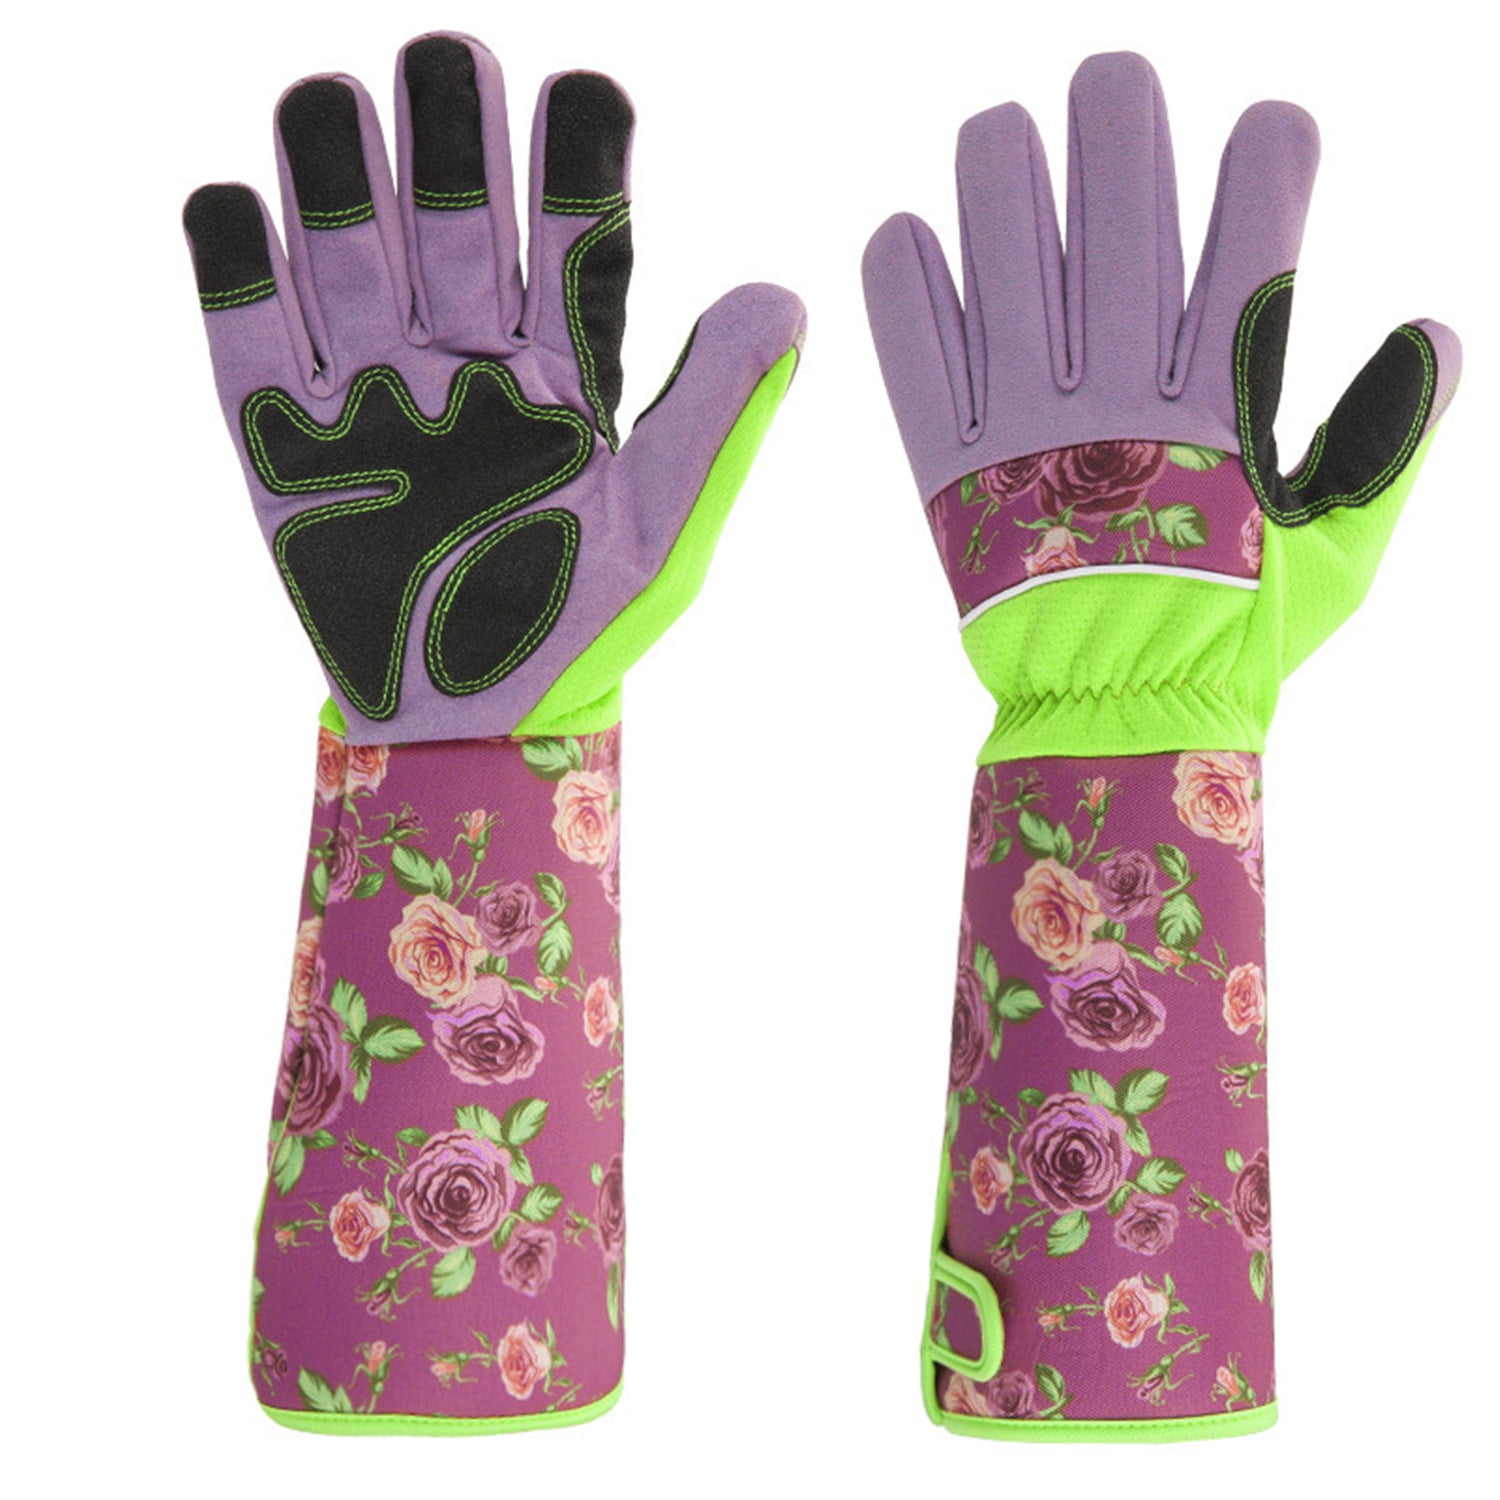 Acdyion Gardening Gloves Rose Pruning Thorn & Cut Proof Long Forearm Protection 